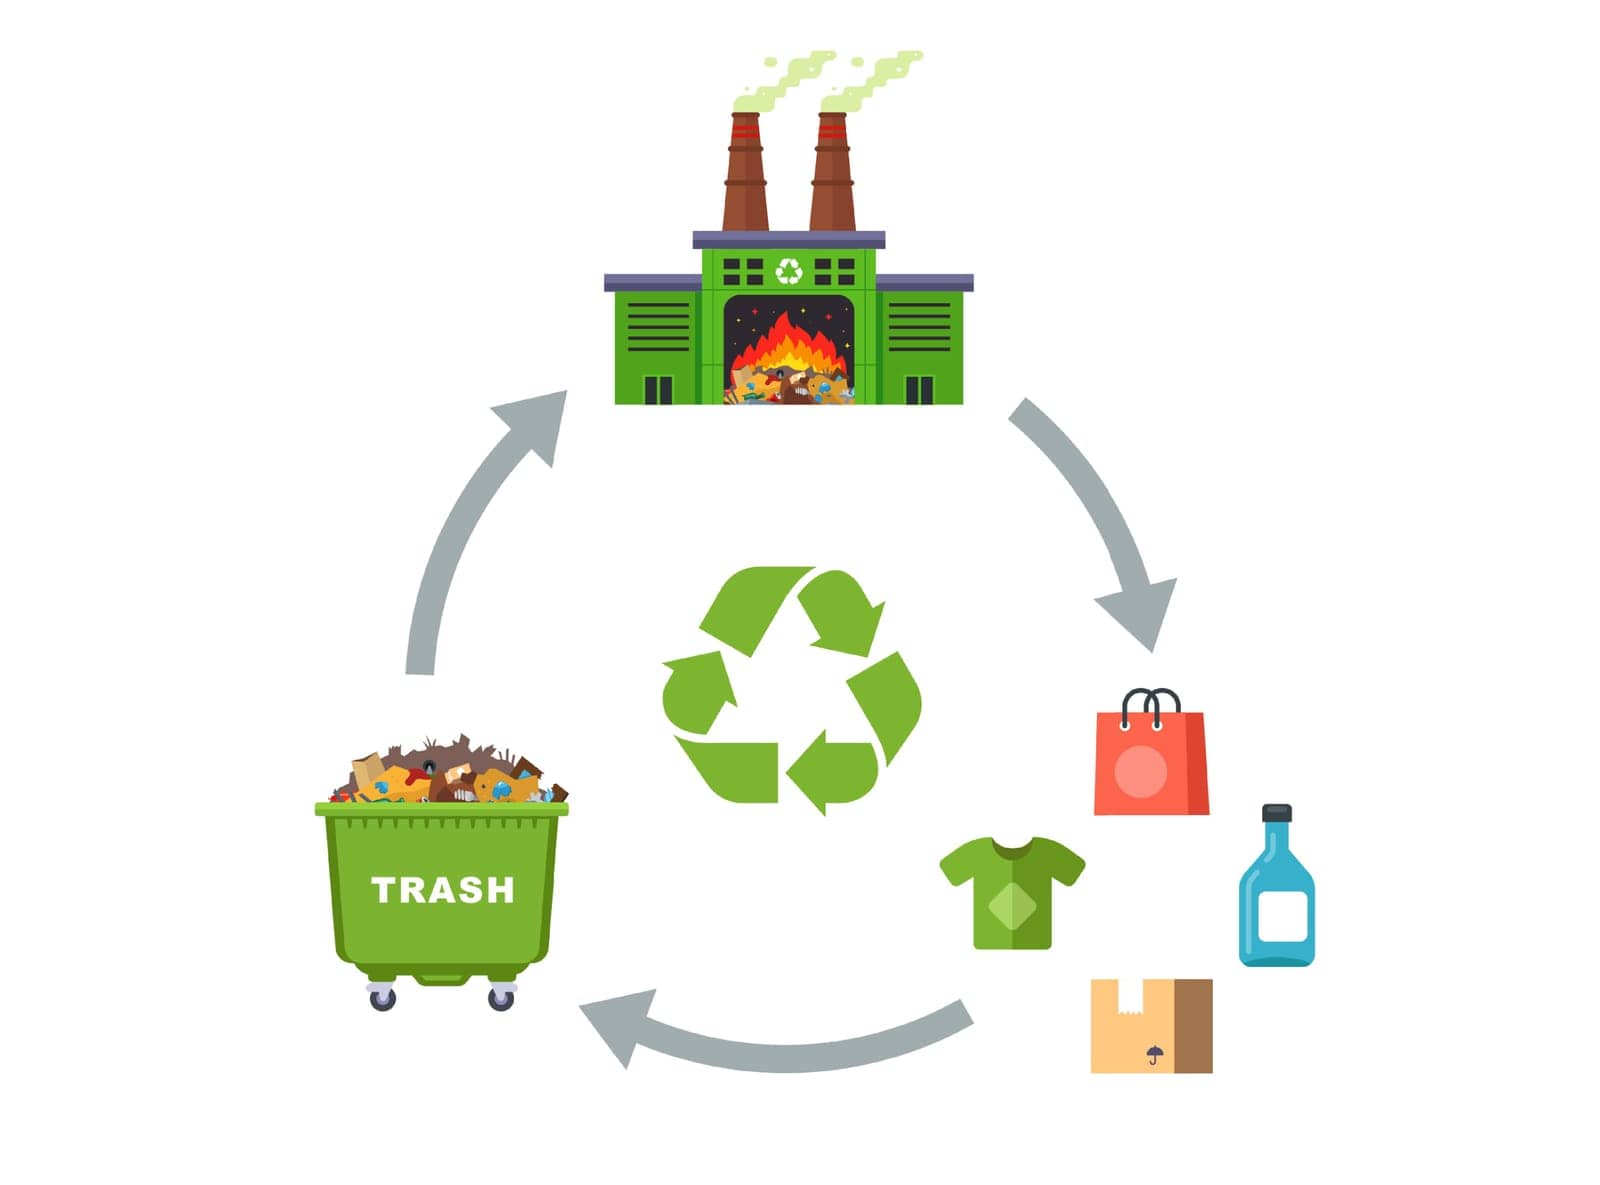 cycle of recycling waste into consumer goods. by PlutusART